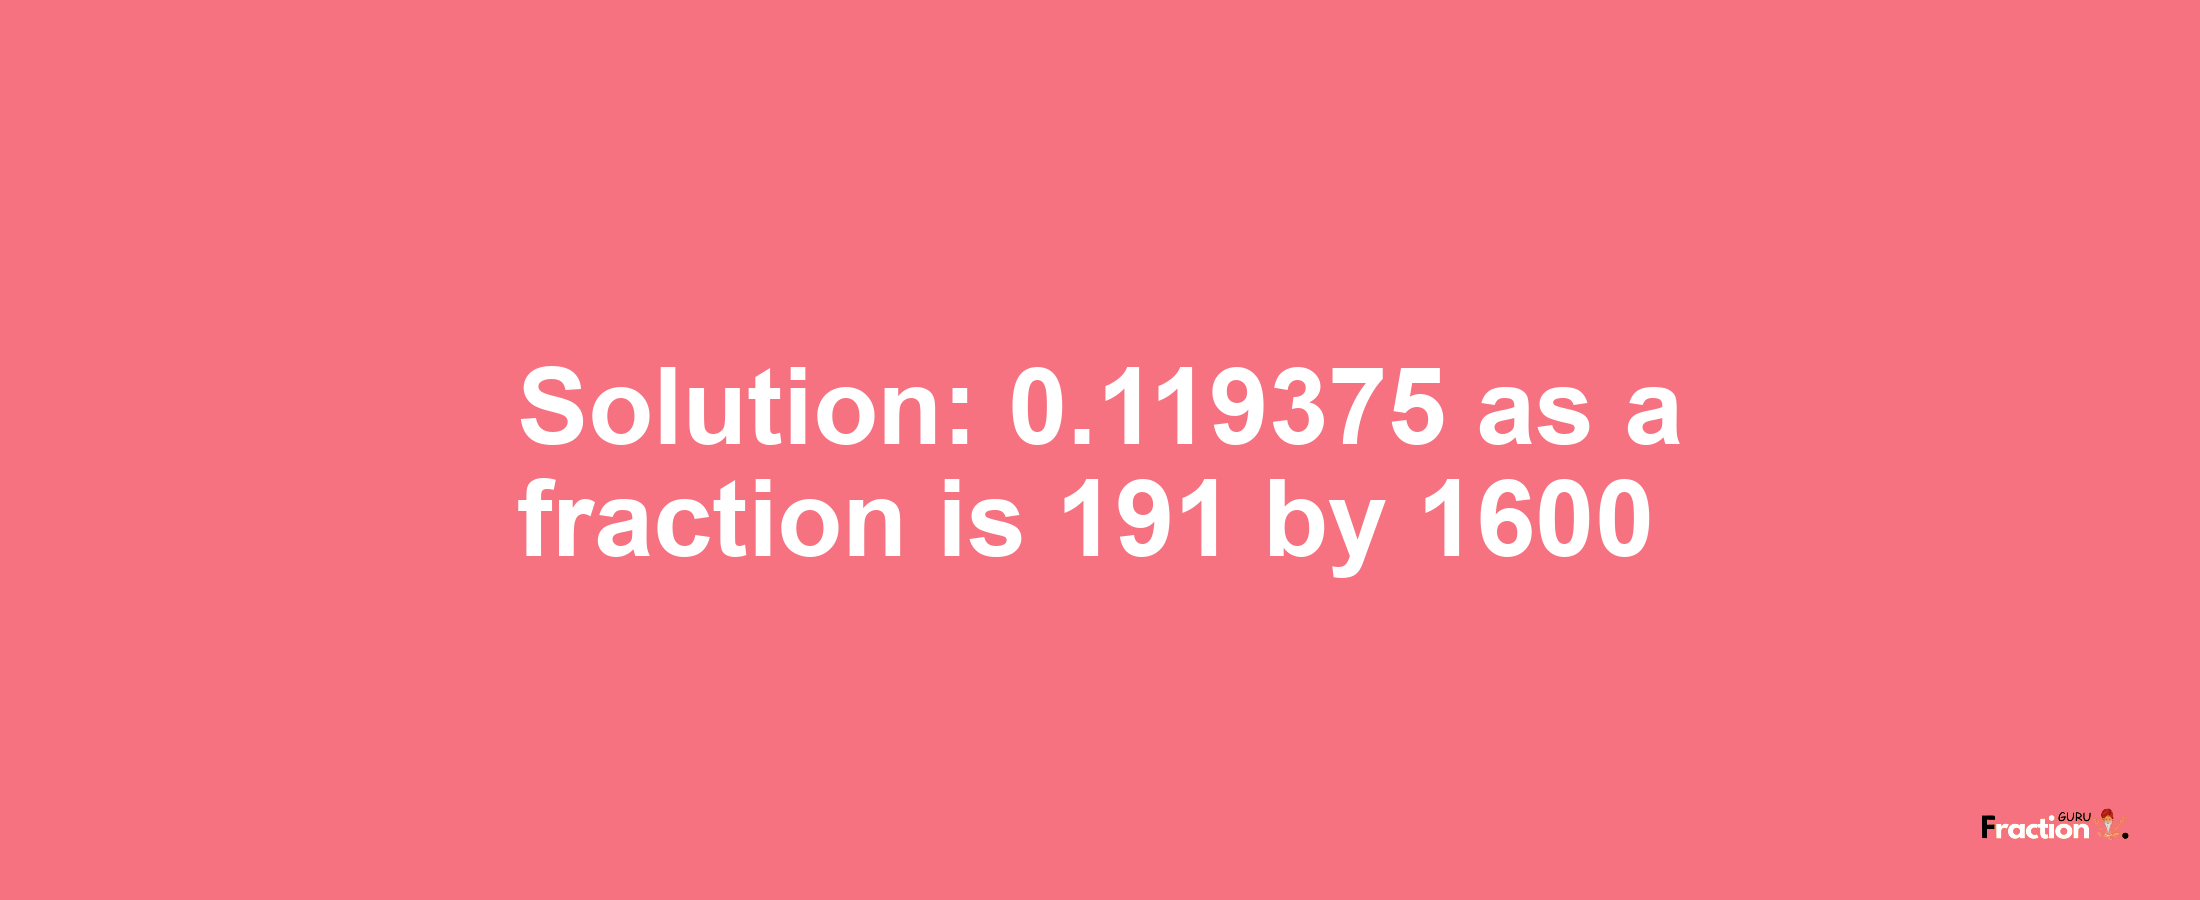 Solution:0.119375 as a fraction is 191/1600